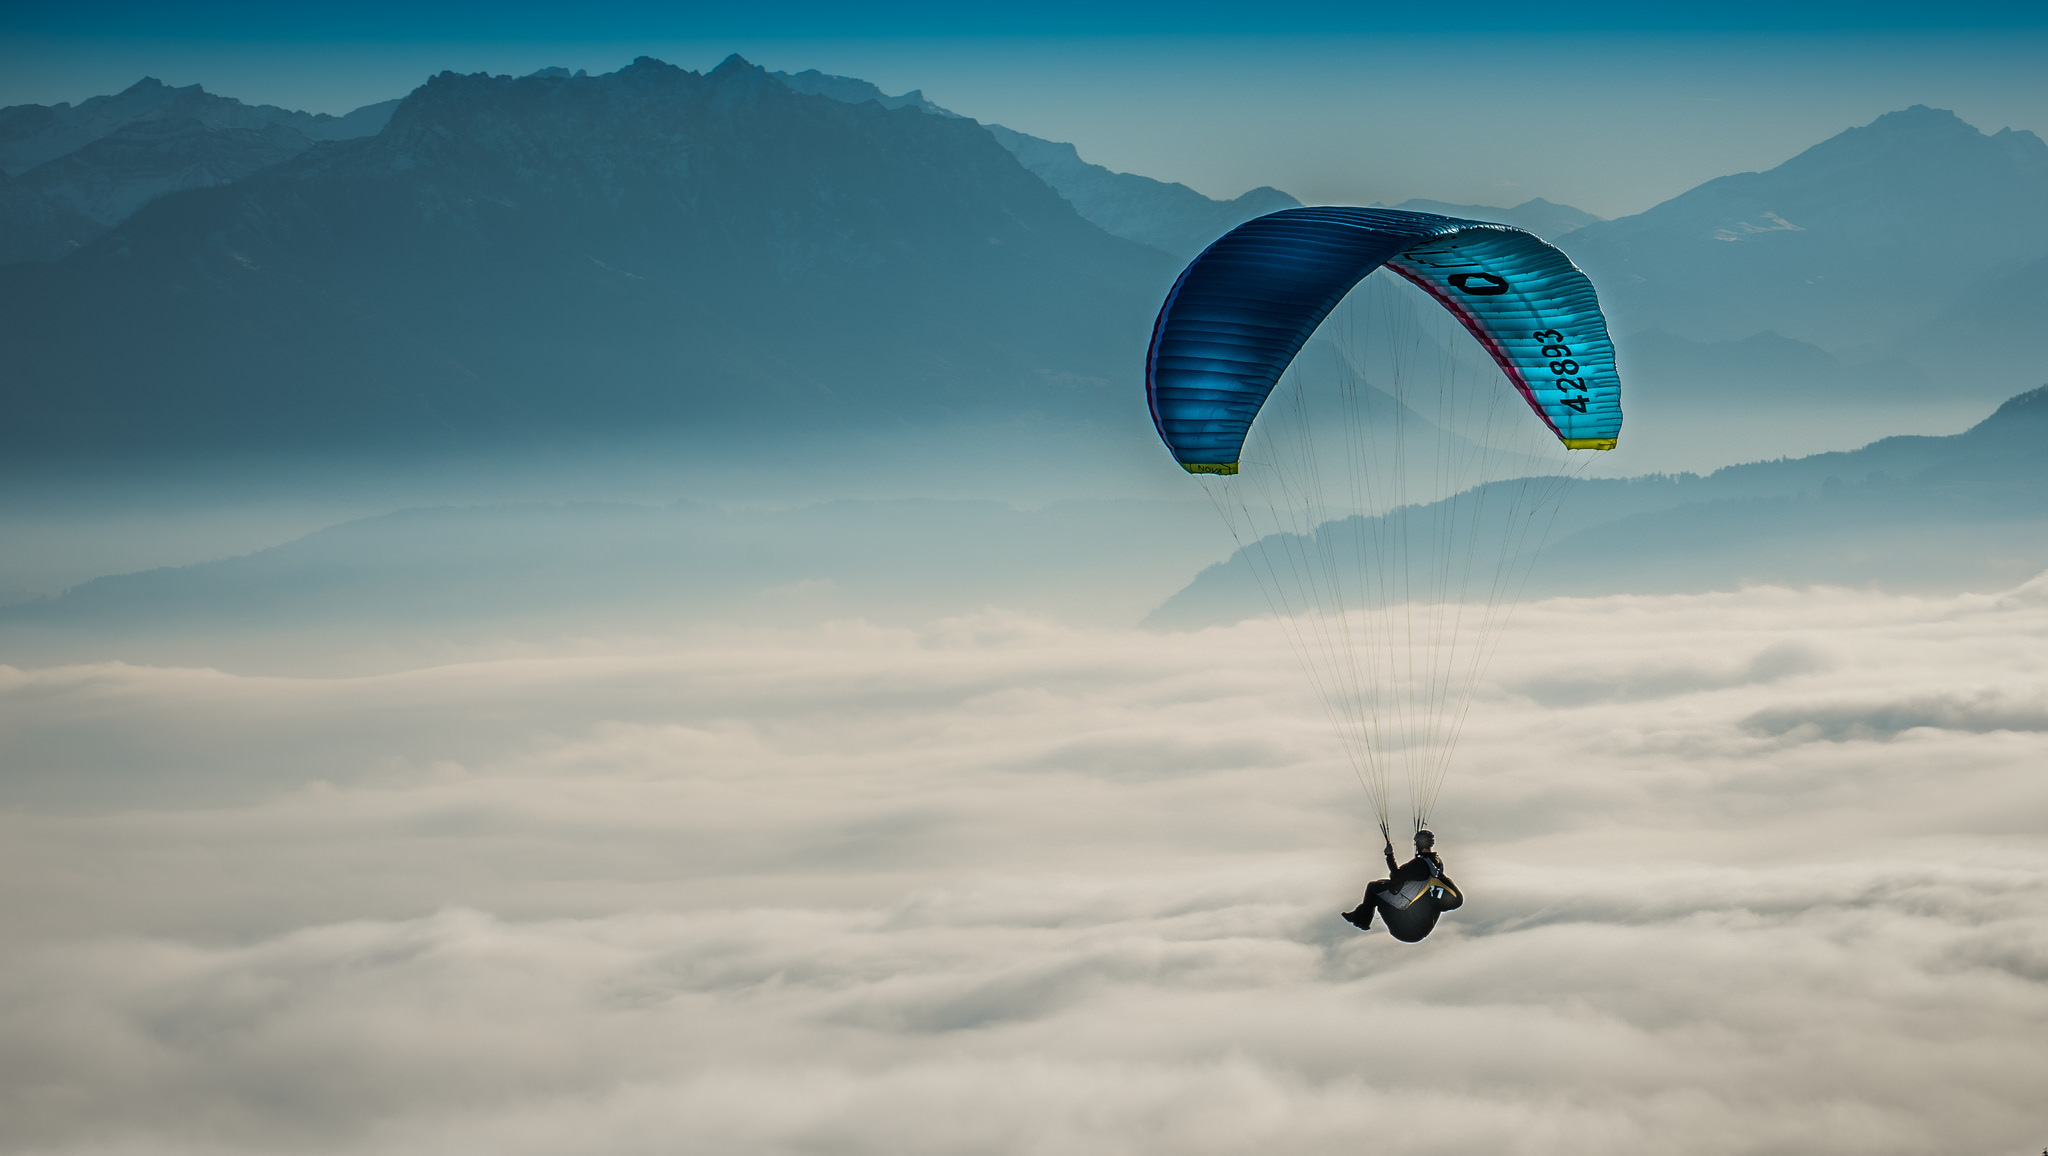 sports, sky, clouds, paragliding, paraglider